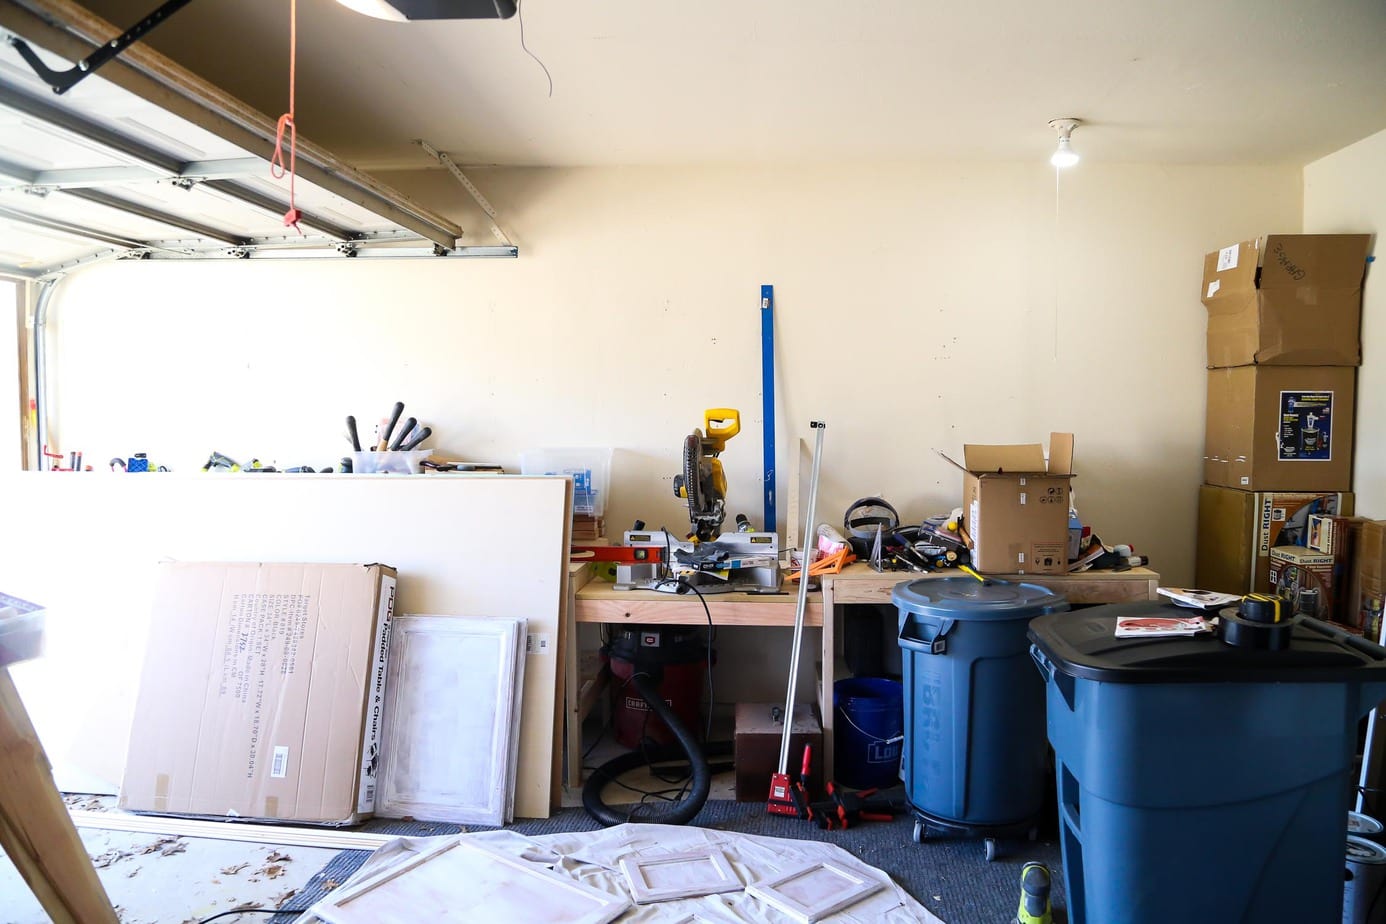 Planning stages of turning a garage into a workshop